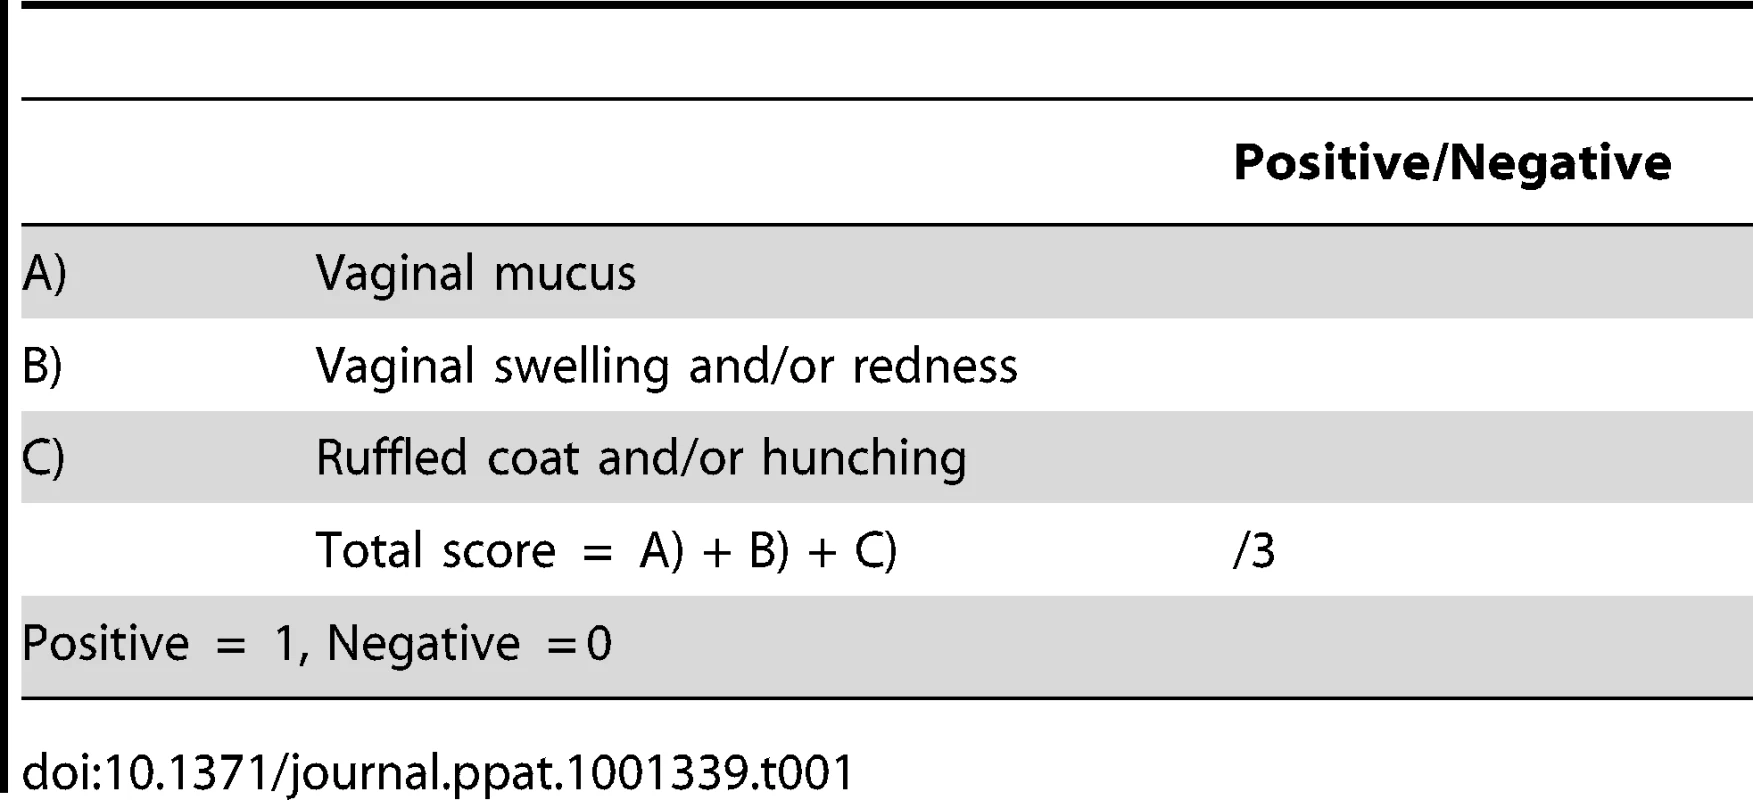 Clinical scoring of genital tract infections.